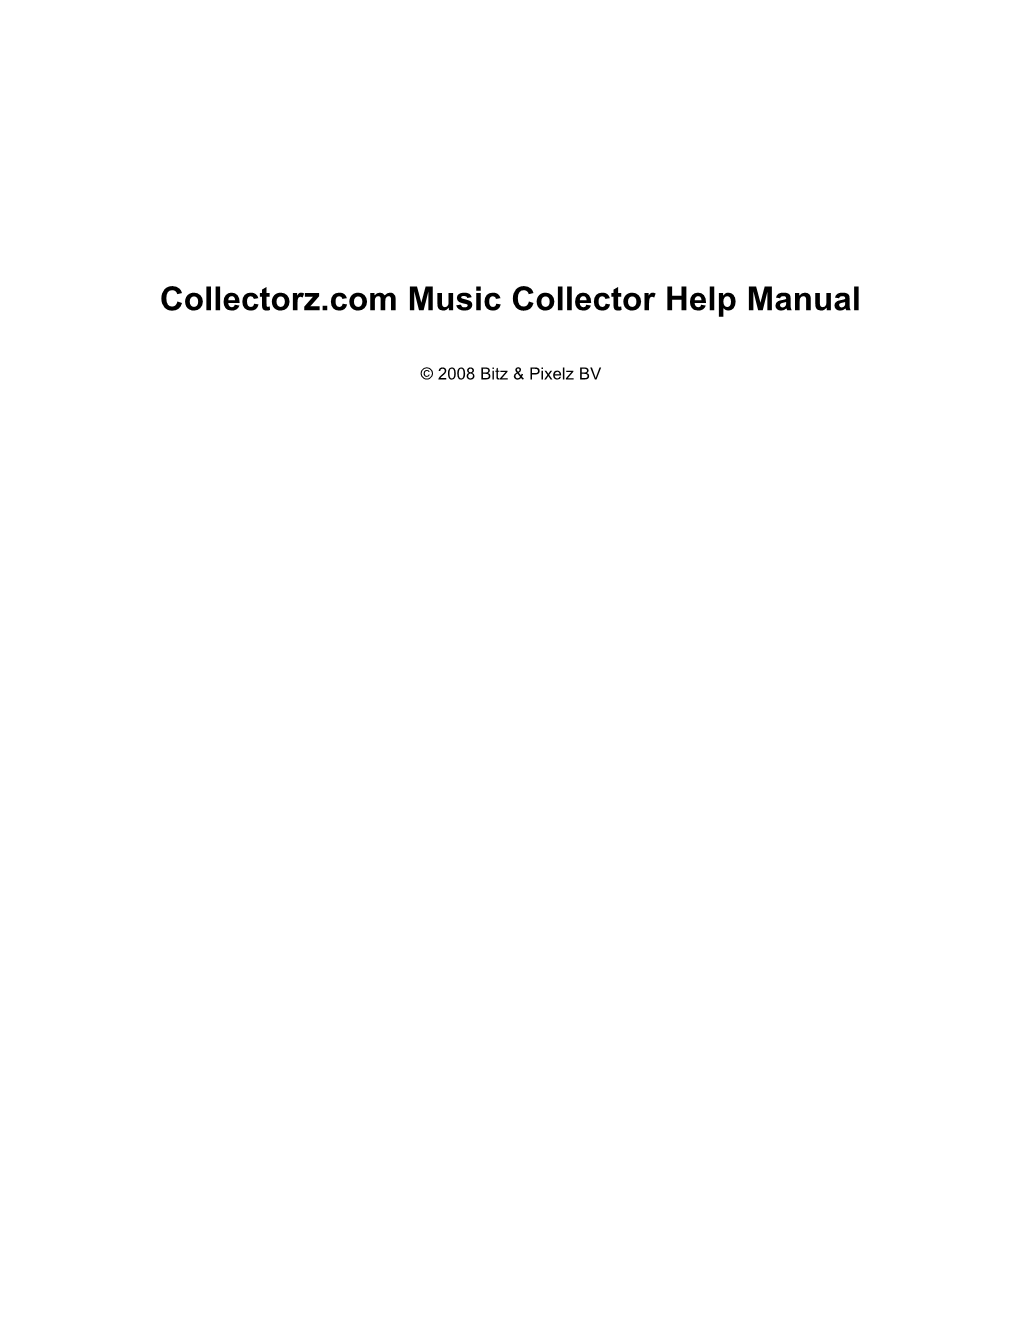 Collectorz.Com Music Collector Help Manual